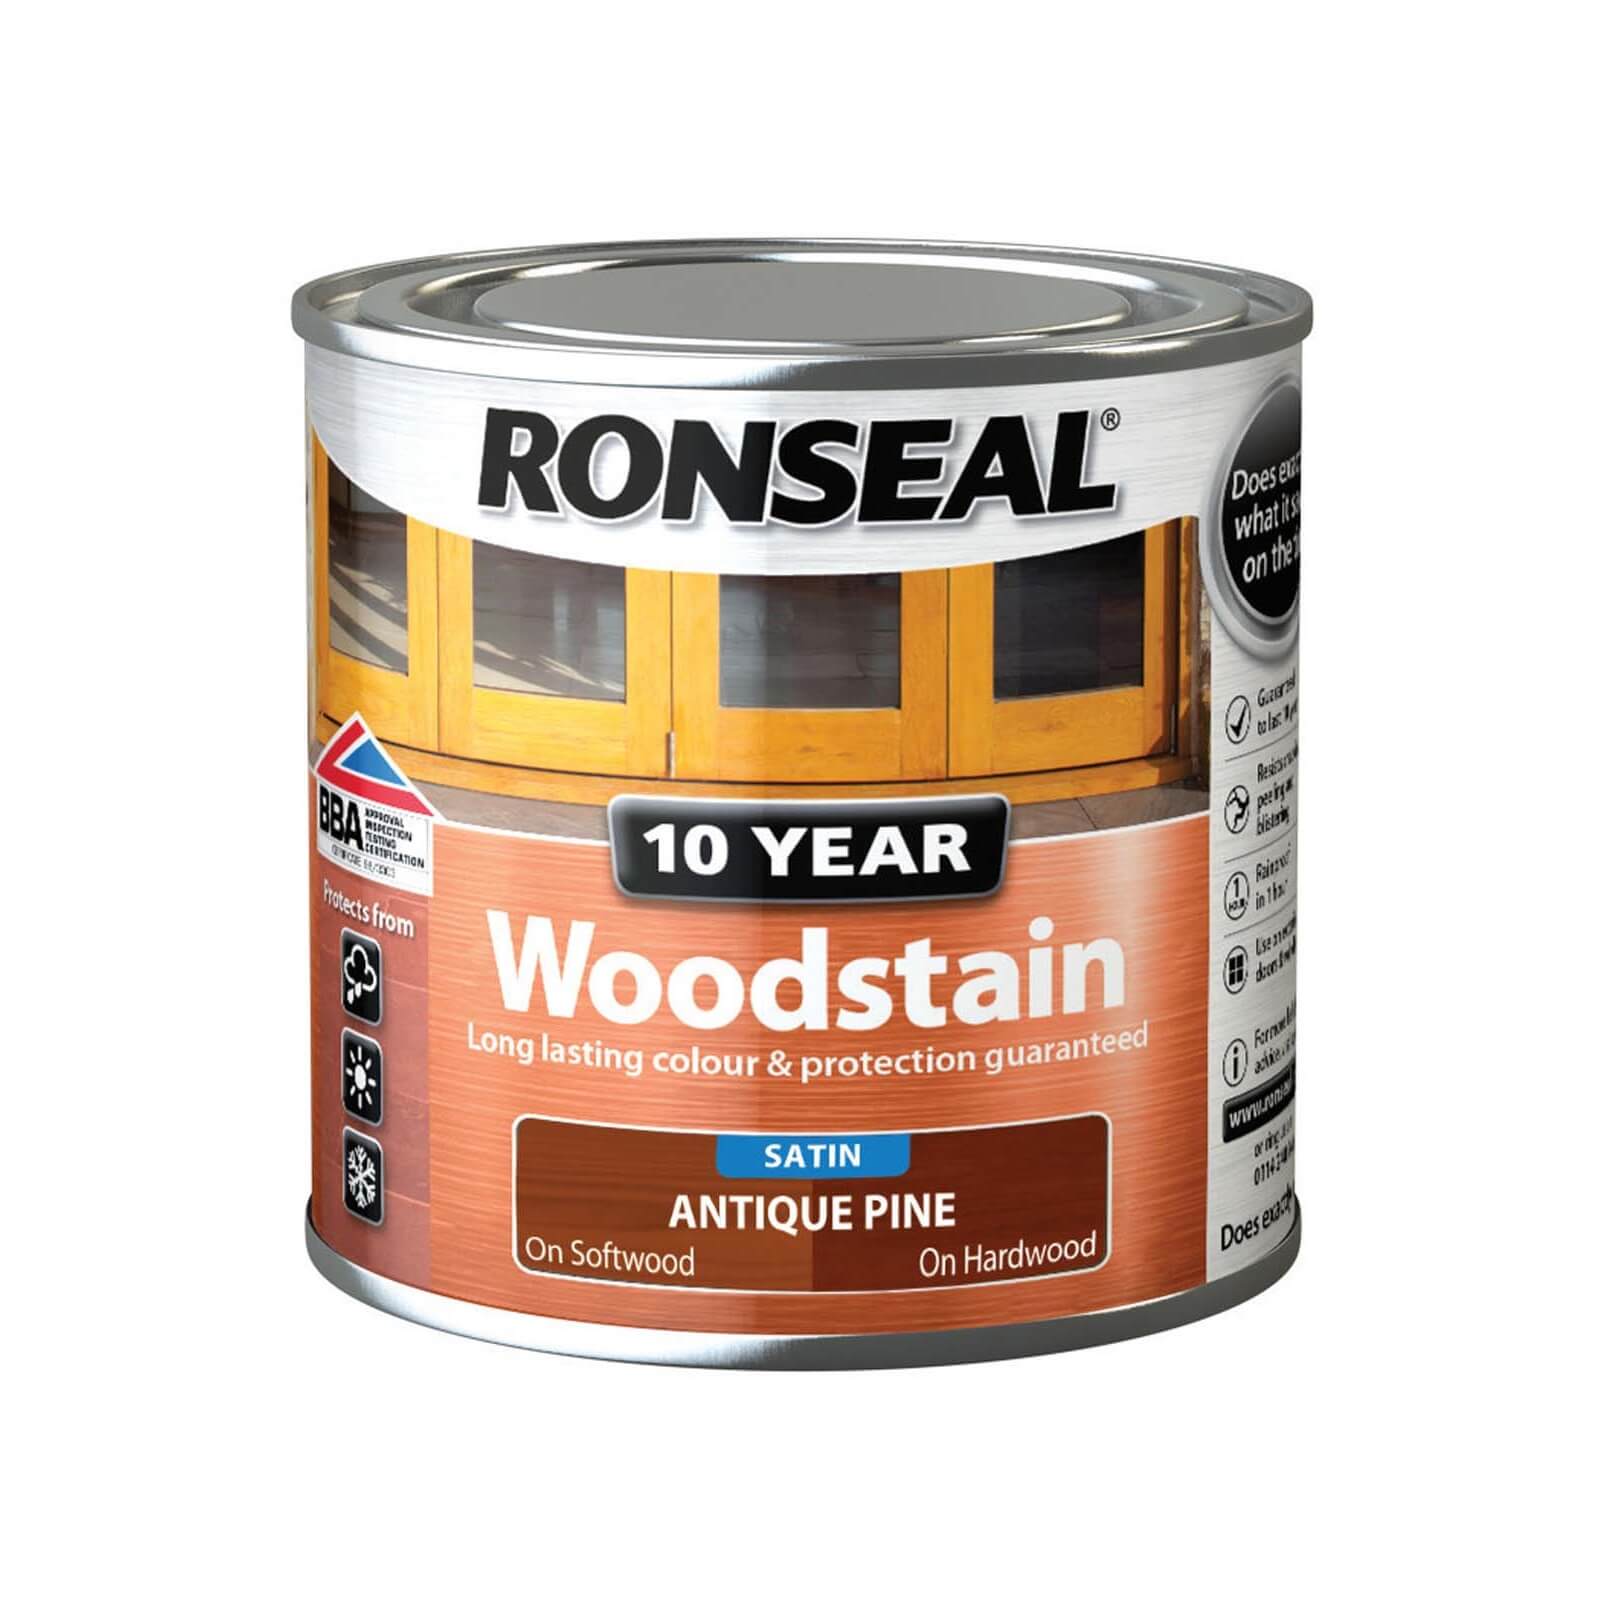 Ronseal 10 Year Woodstain Antique Pine Satin - 250ml